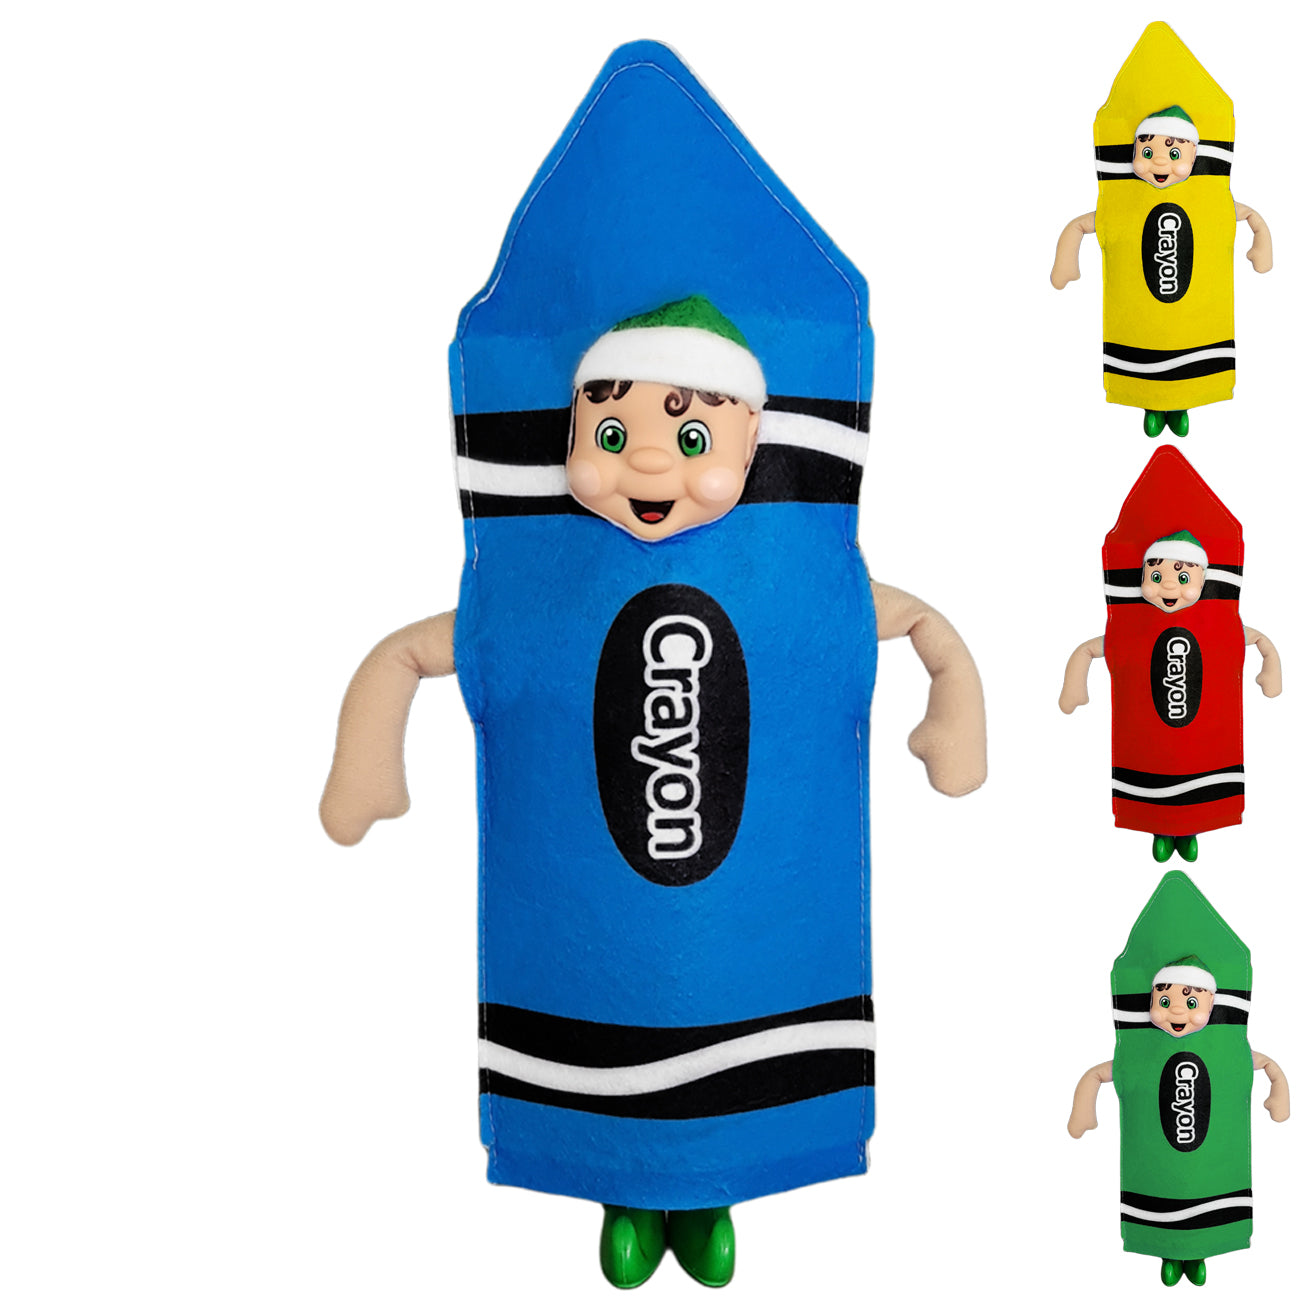 crayon elf costume available in red, green, yellow and blue